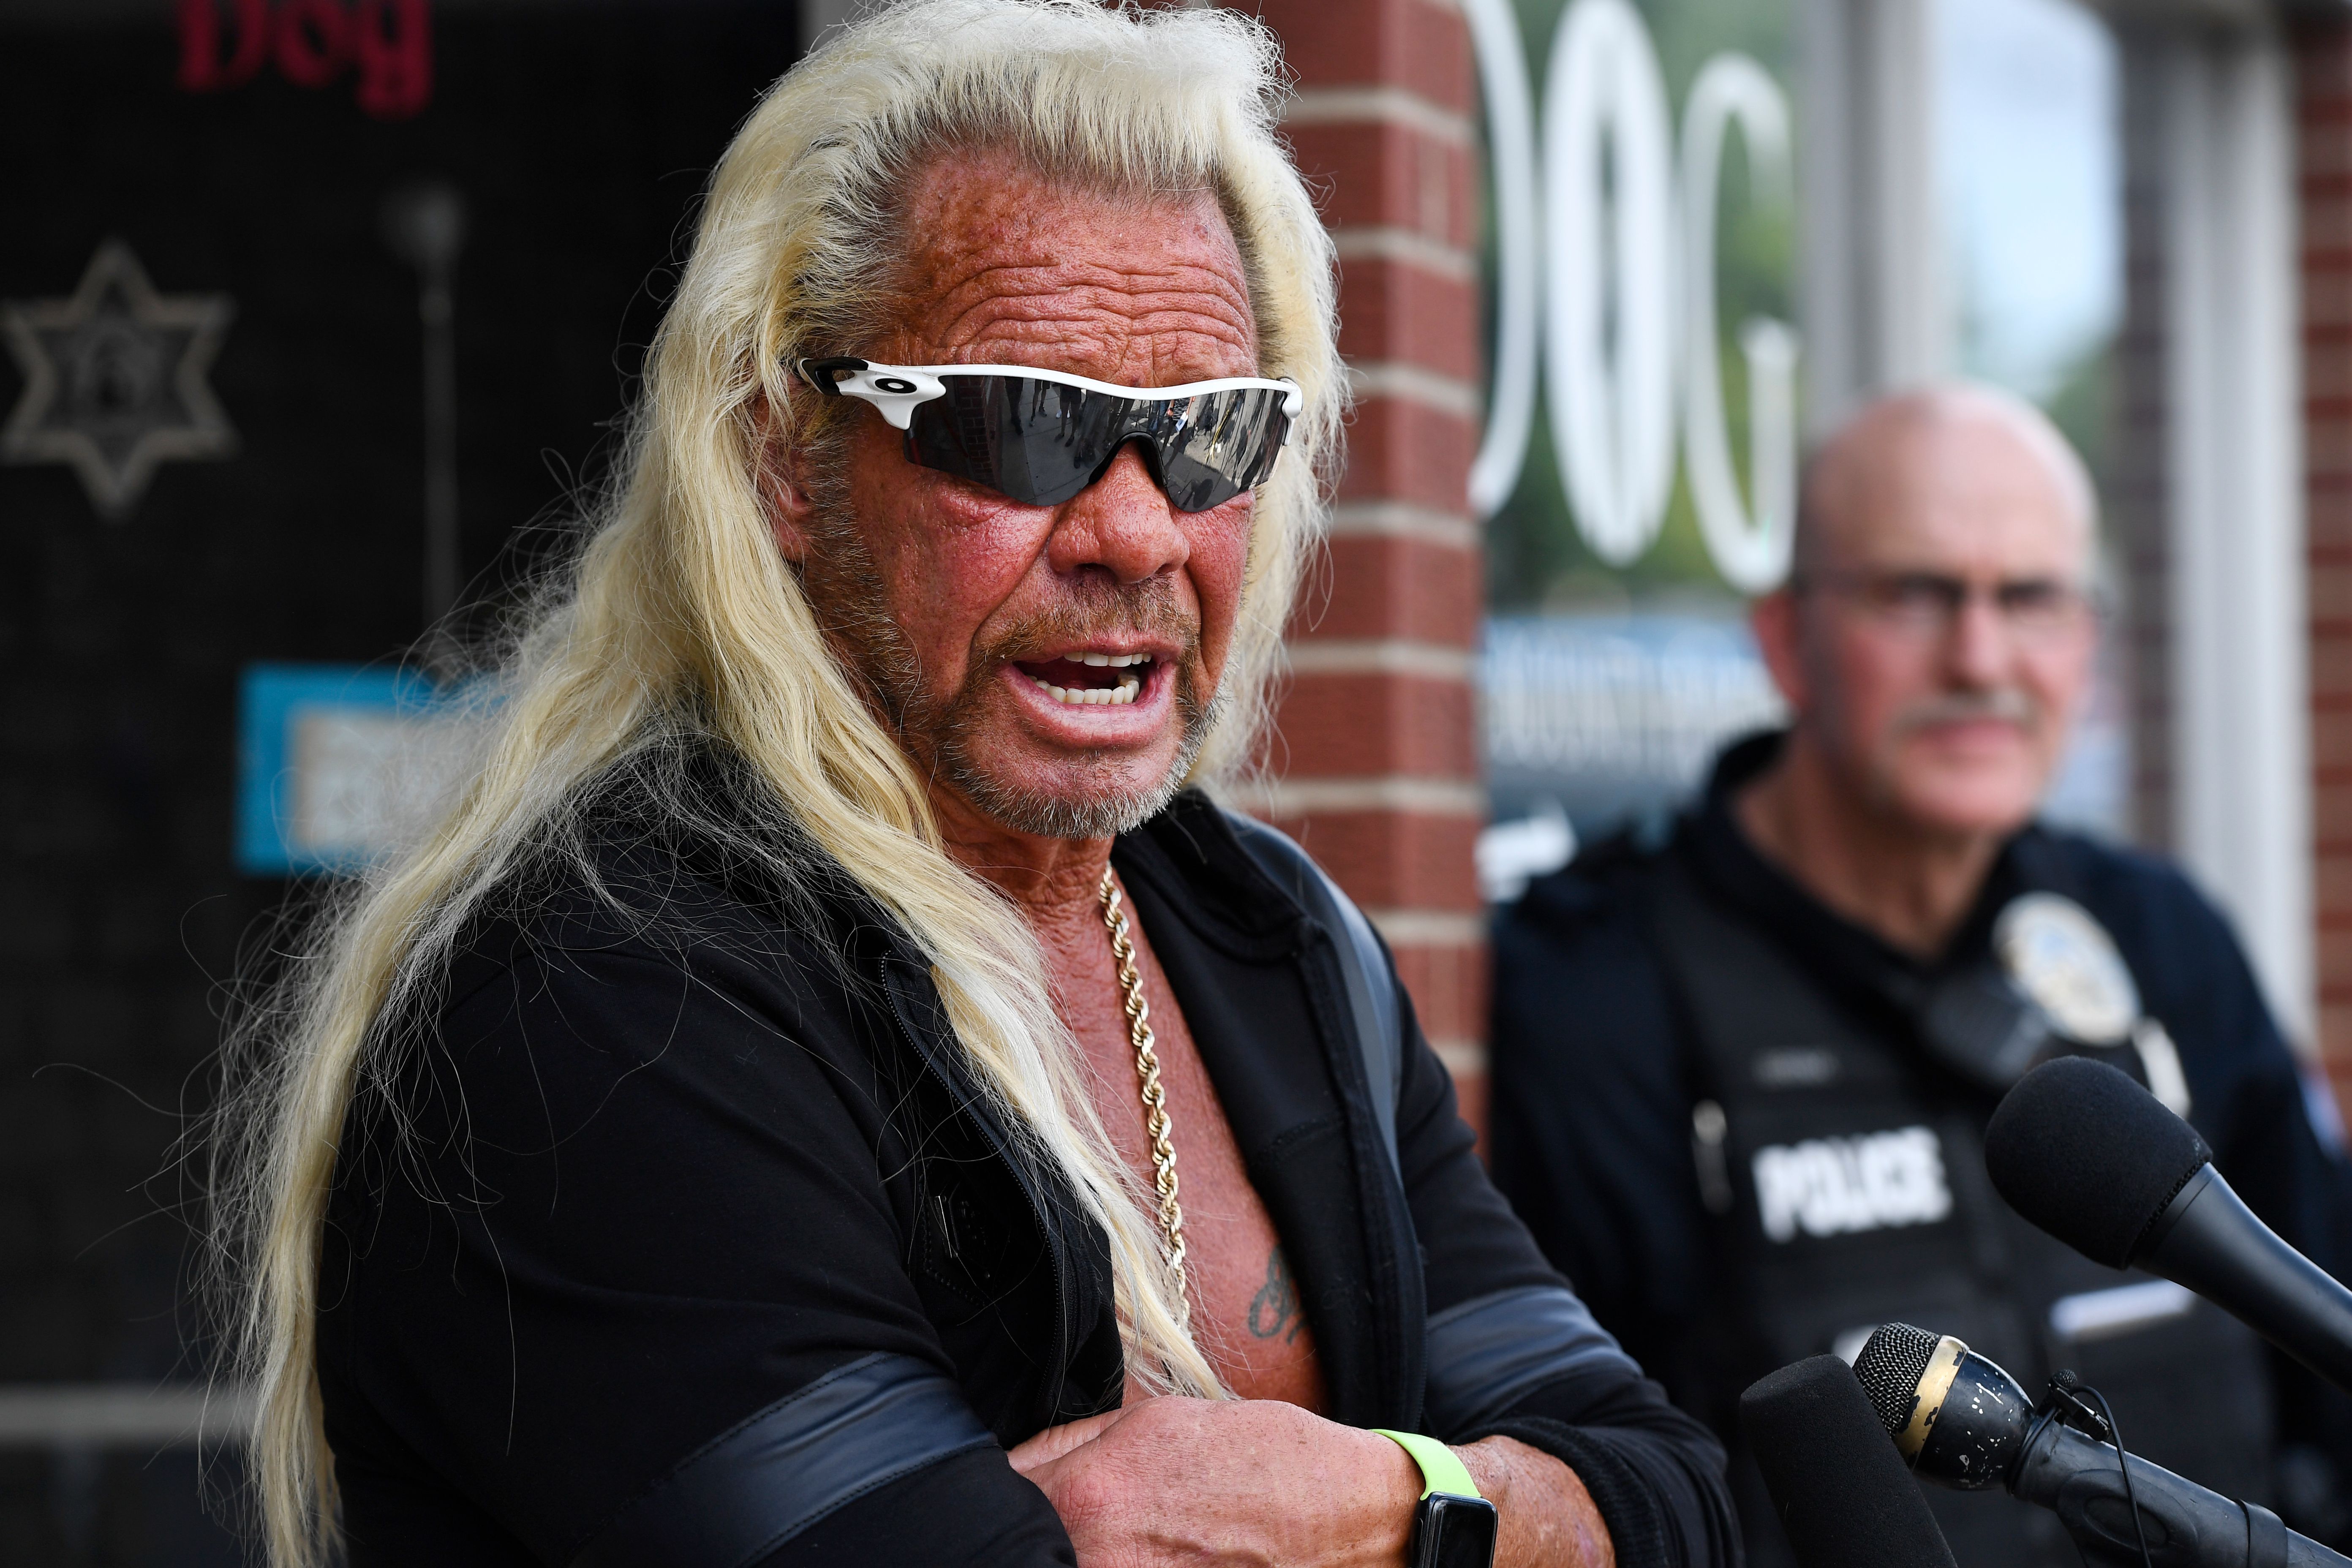 Duane Chapman during a press conference in front of his store on August 02, 2019 | Photo: Andy Cross/Getty Images